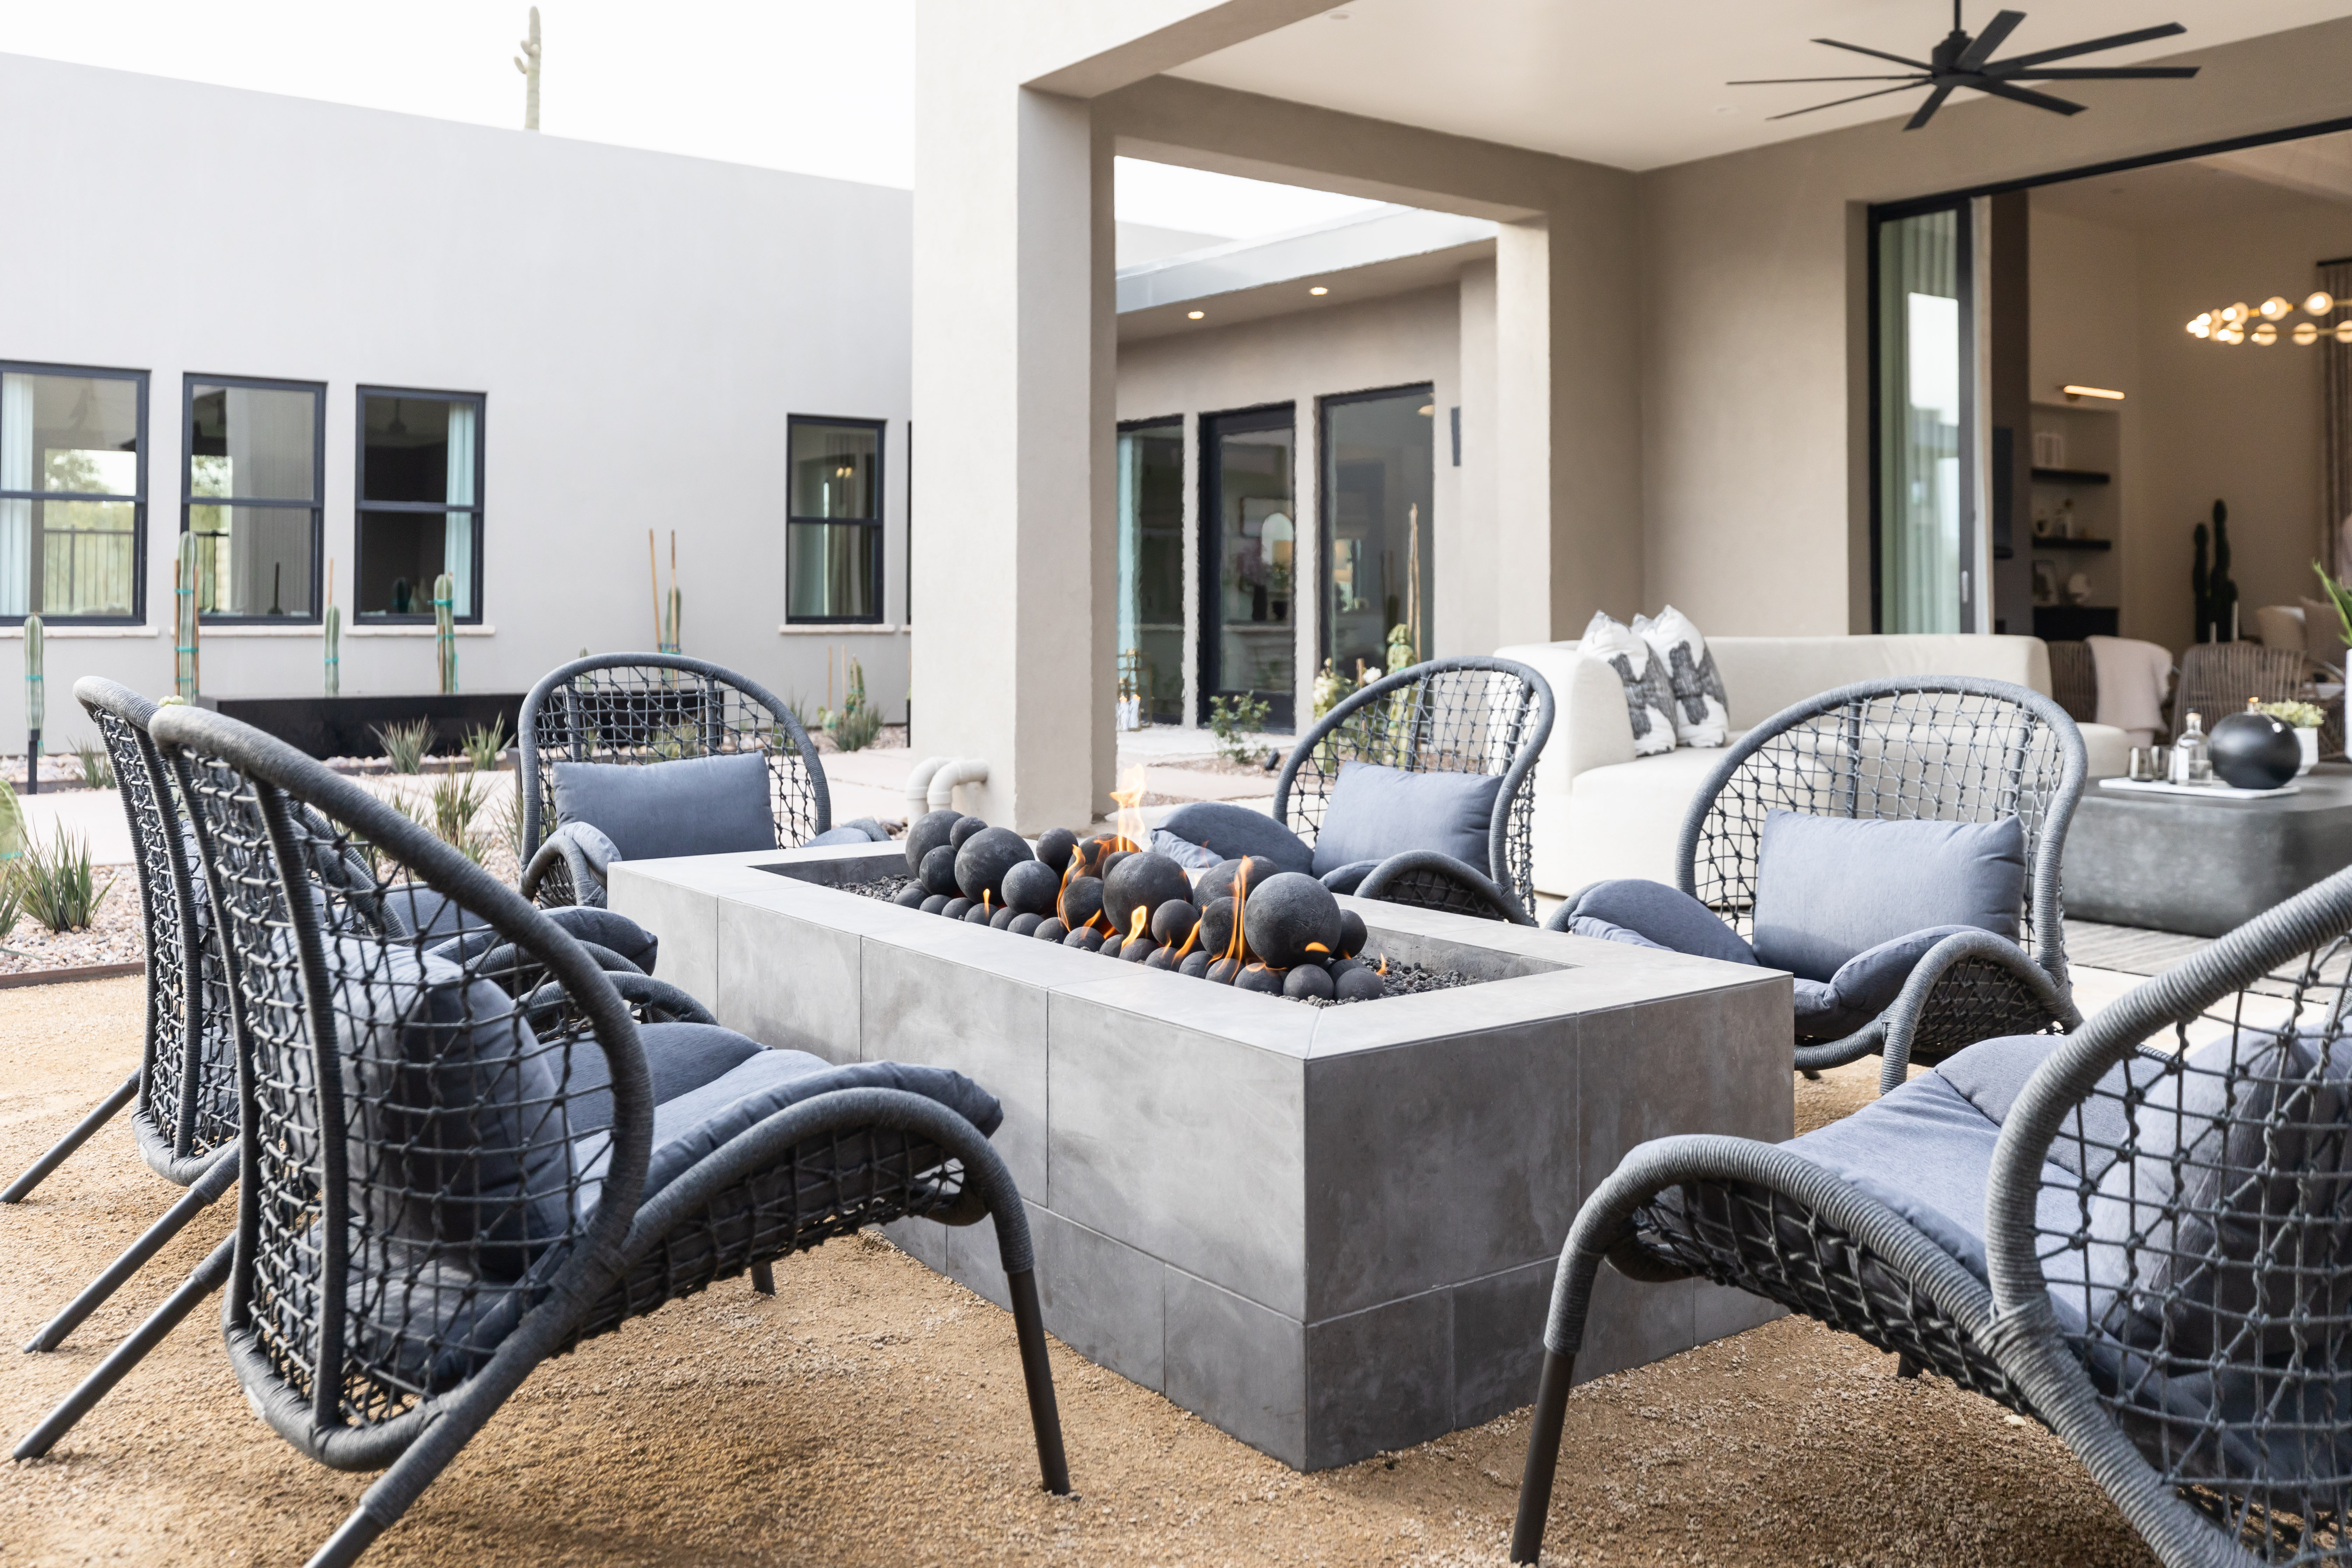 A grey tones outdoor firepit with matching seating